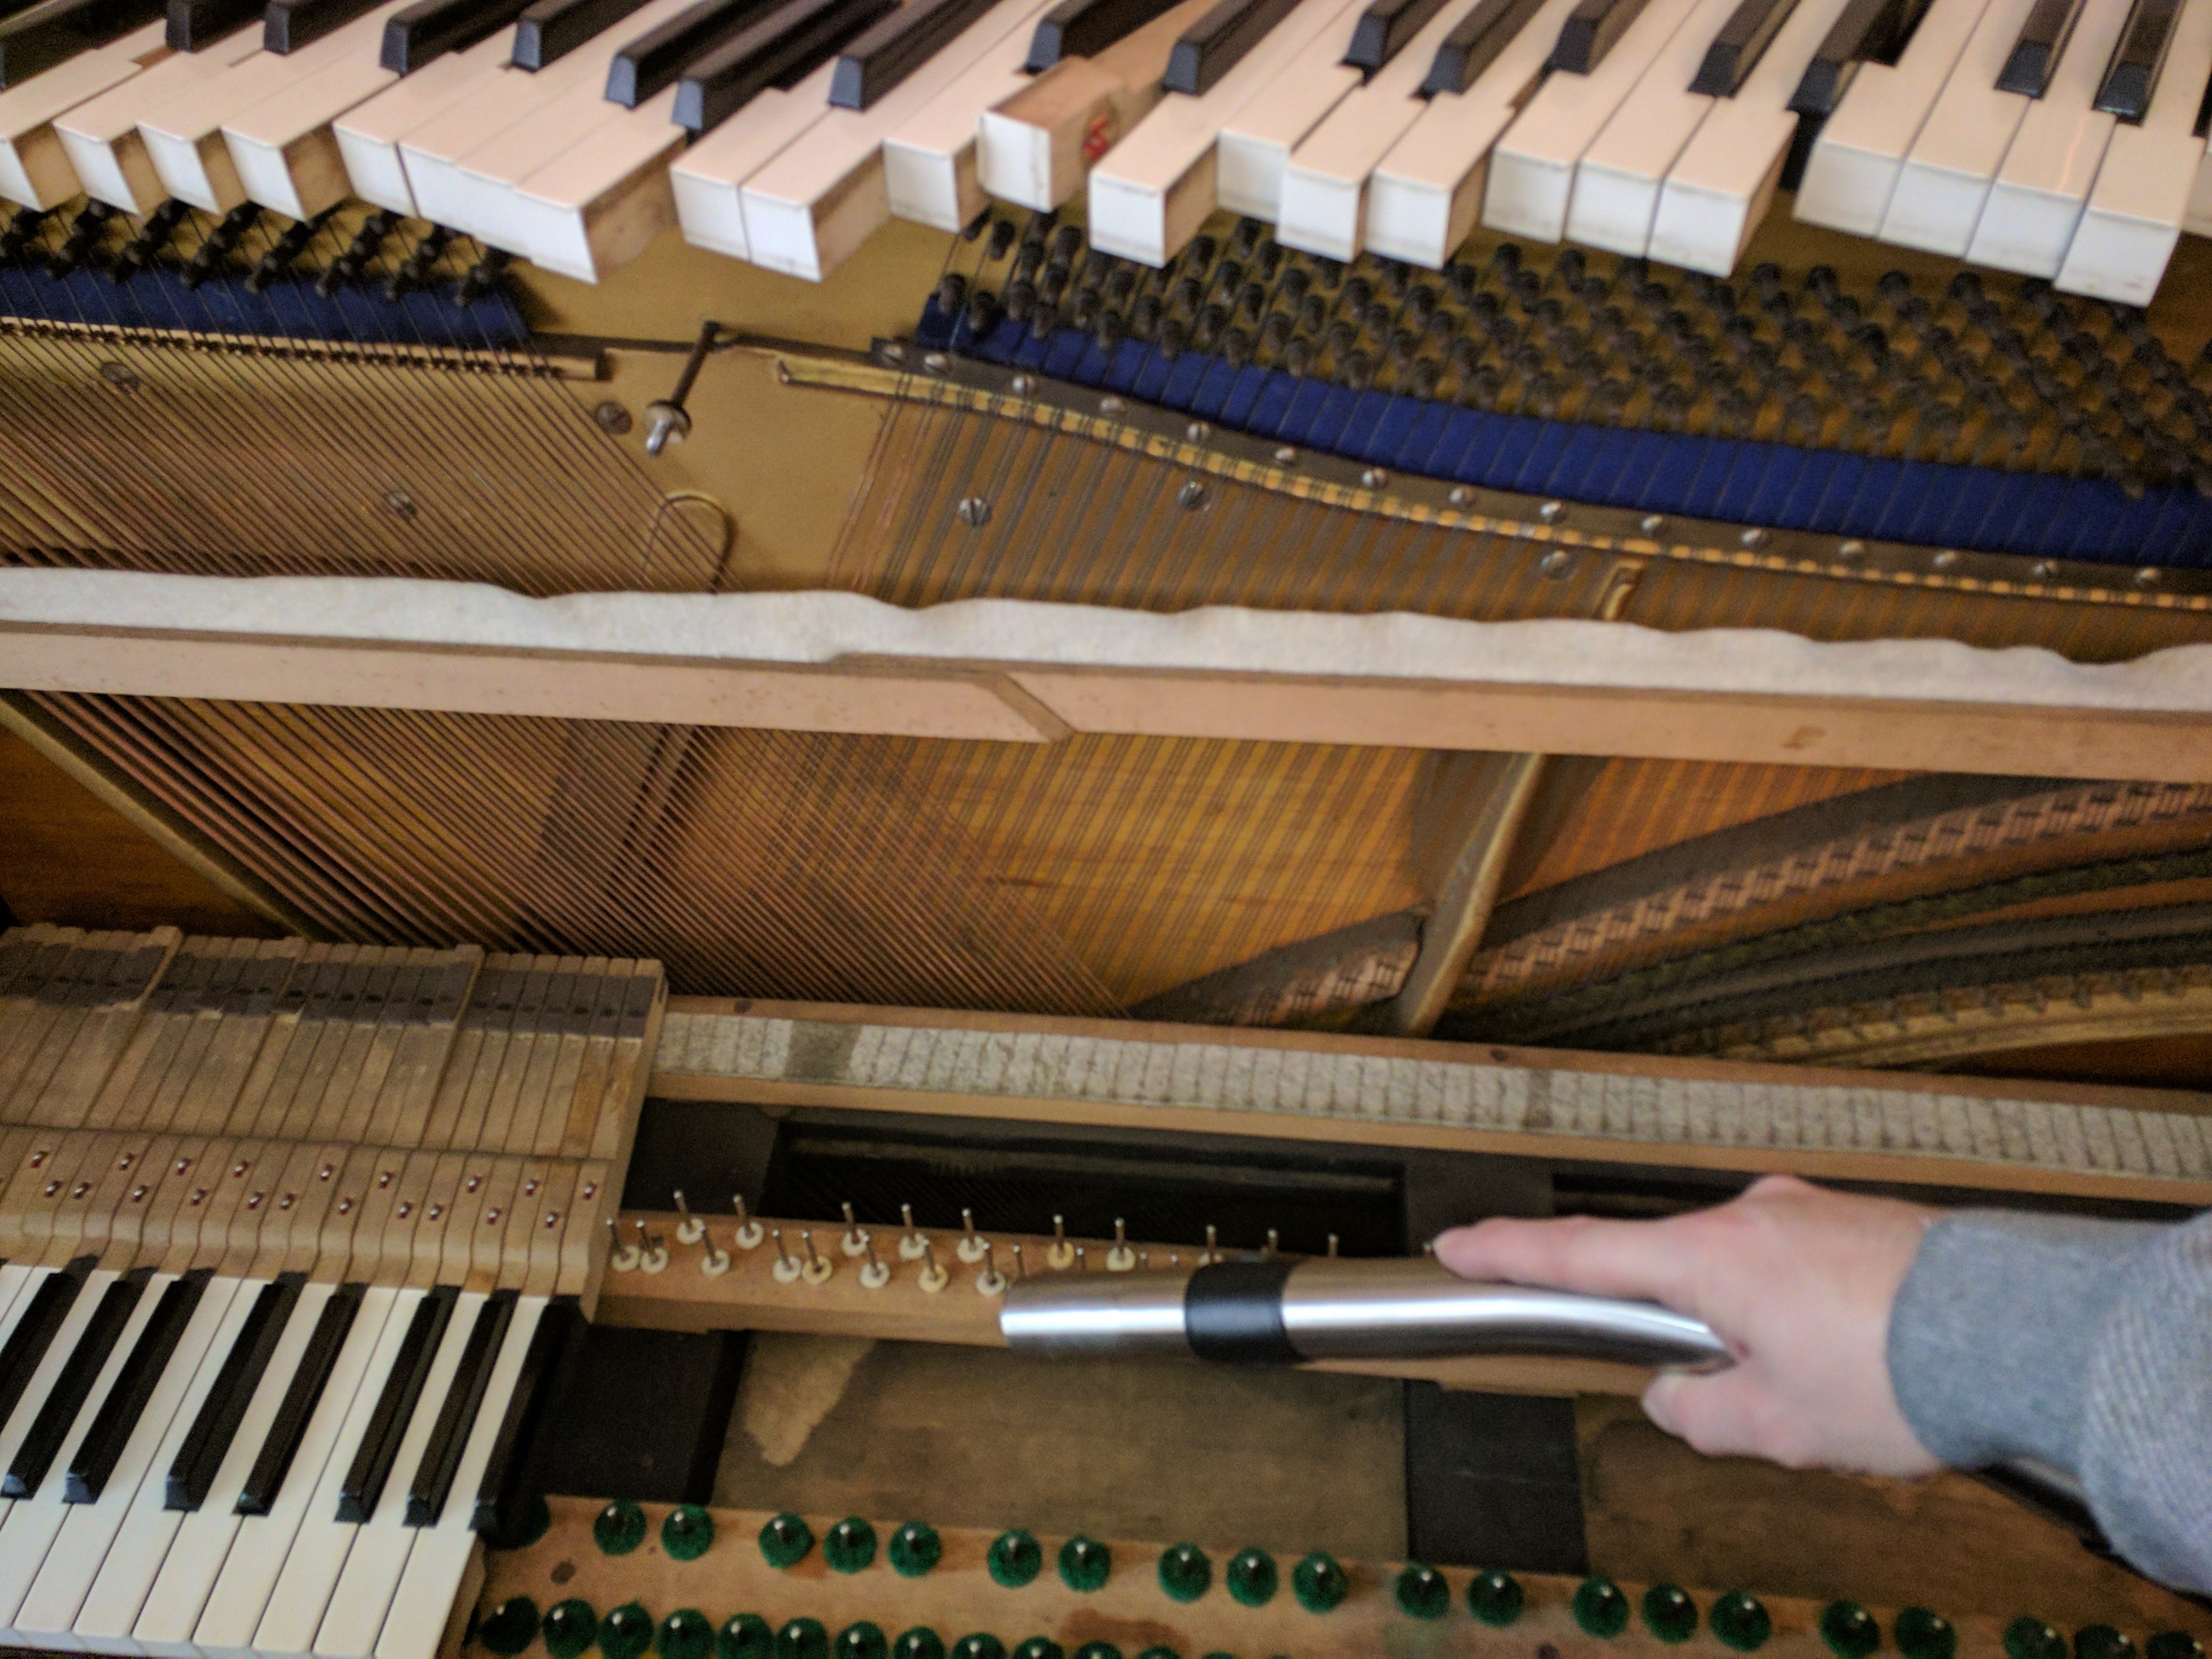 Cleaning an Upright Piano